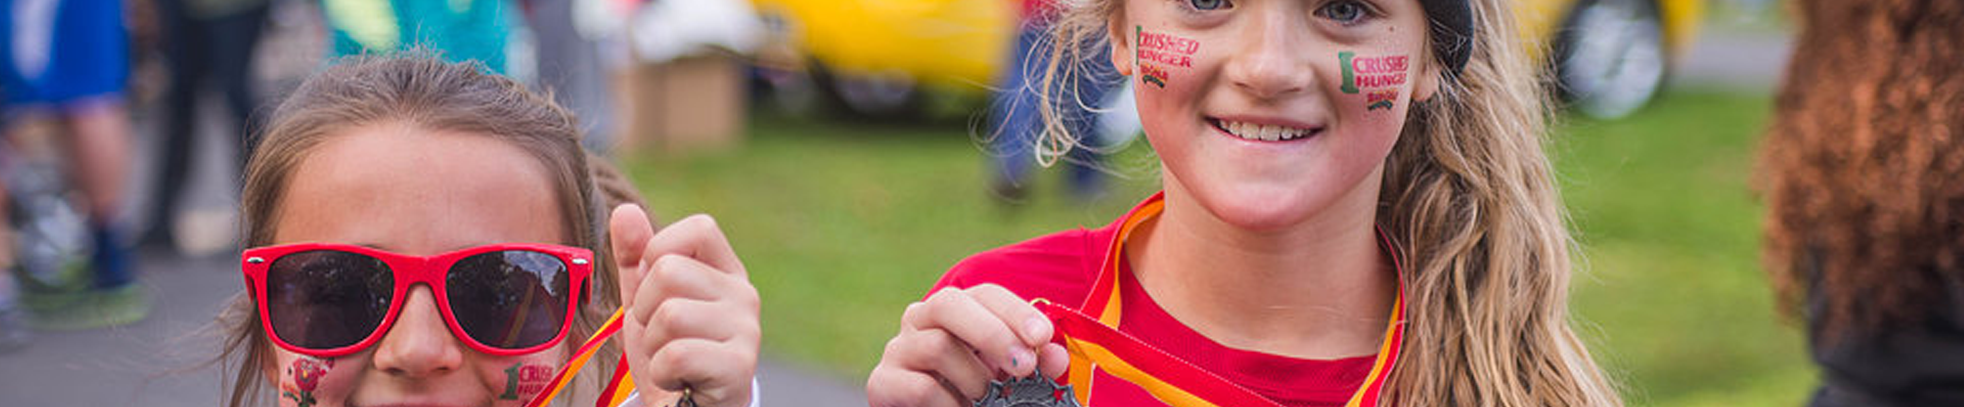 Girls show off medals at Crush Hunger